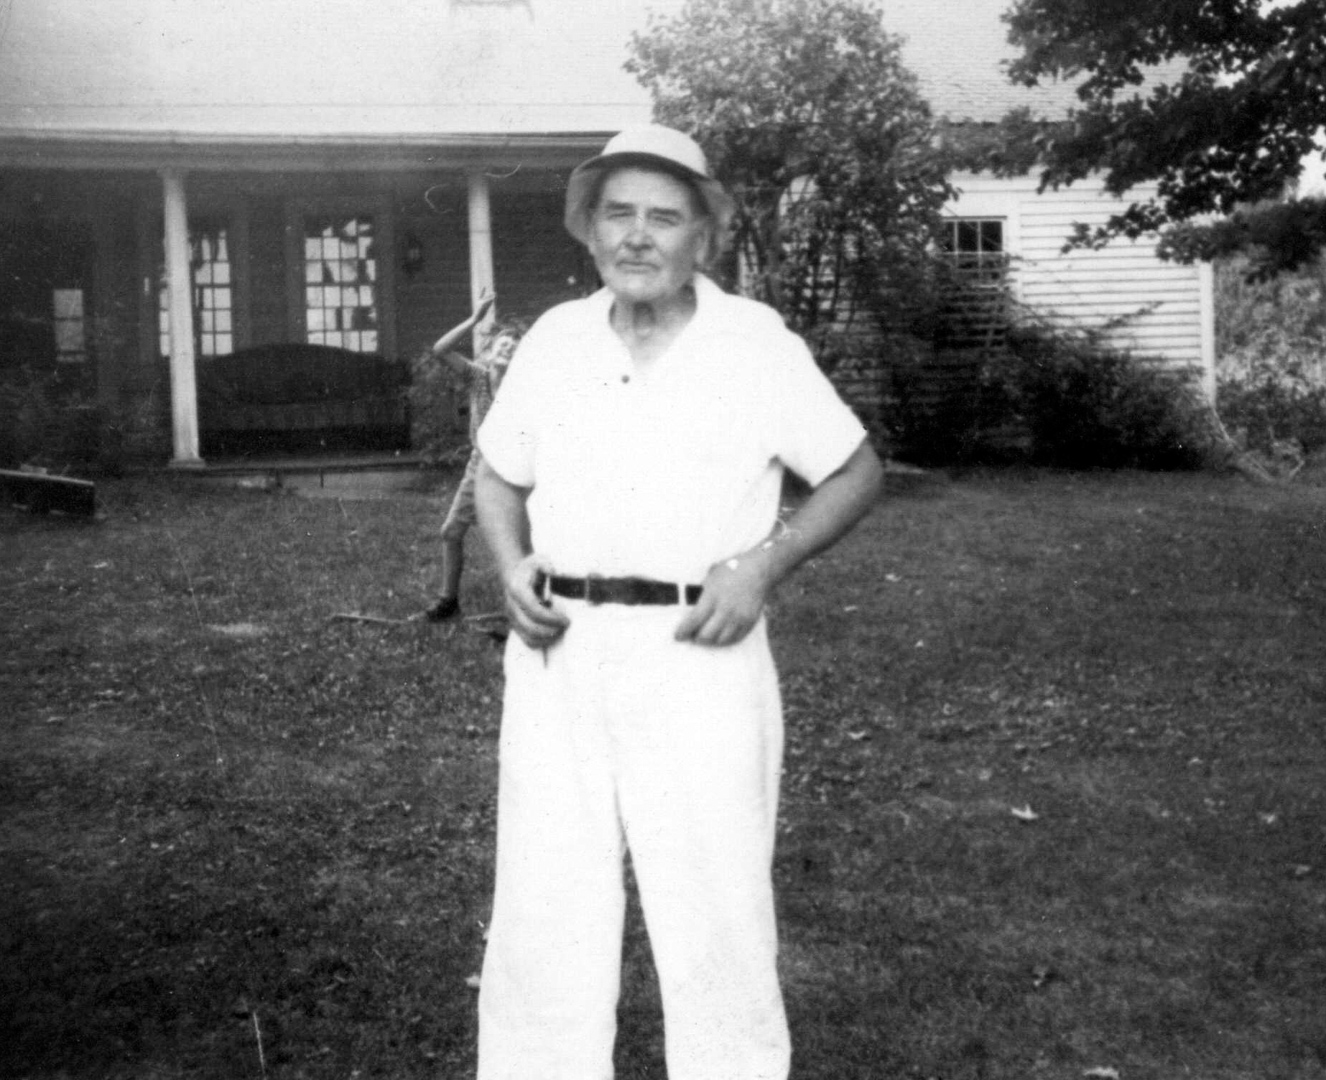 Grandpa Ashley [Dr Dexter D. Ashley] before the Fire - Oct 1939.  At the original family farmhouse